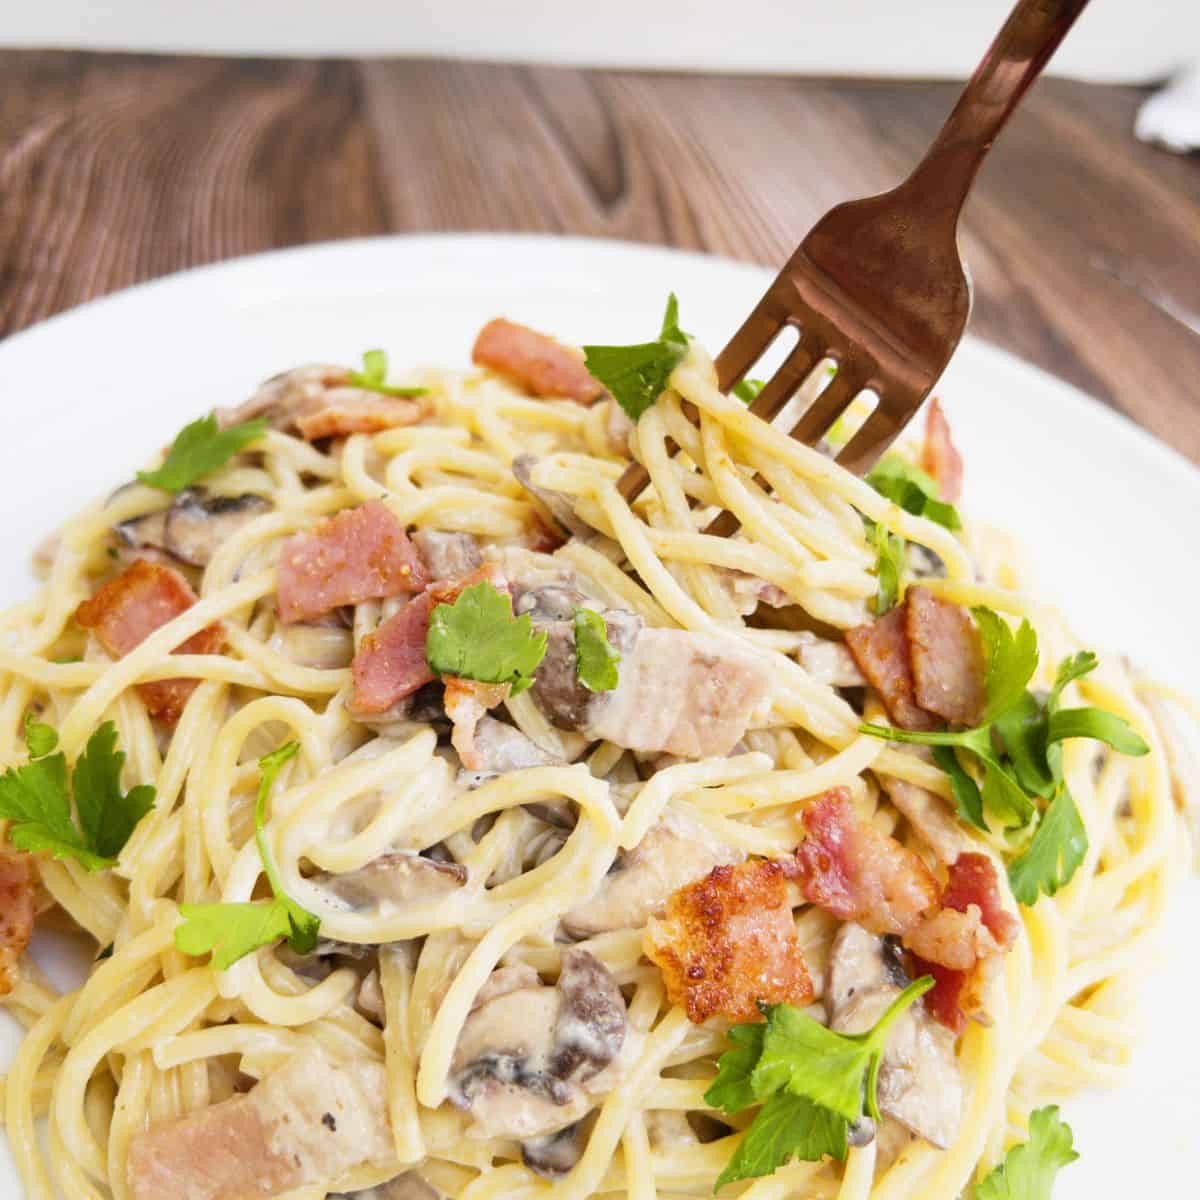 spaghetti carbonara on a plate being twirled by a fork